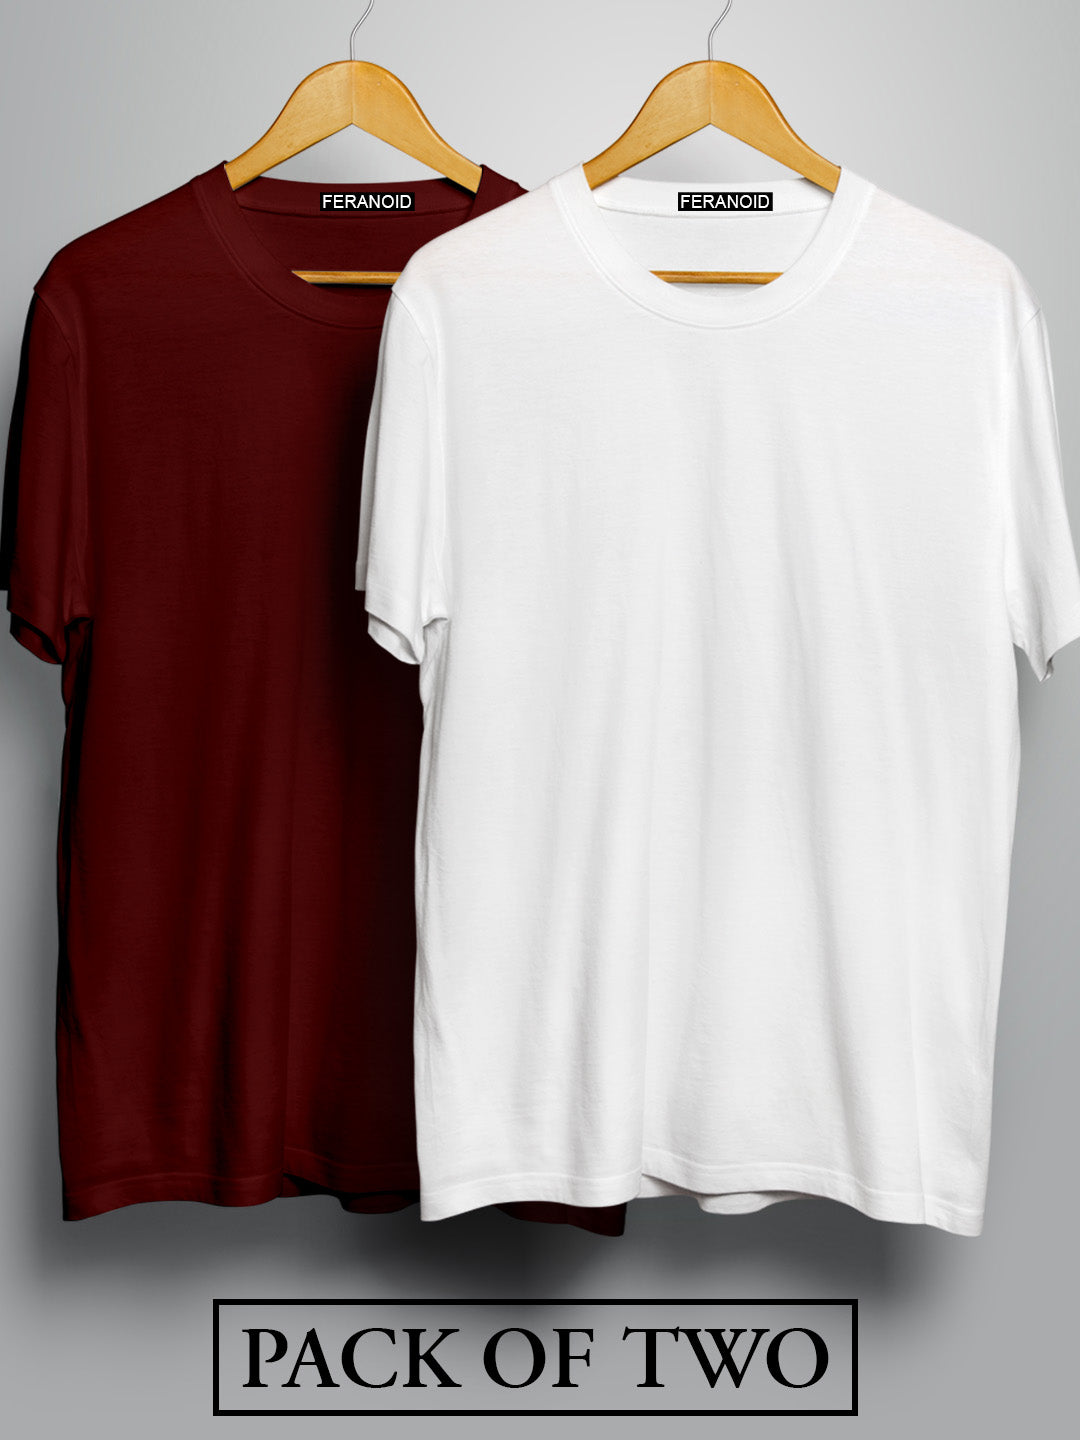 PLAIN HALF SLEEVES PACK OF TWO MAROON AND WHITE T-SHIRTS